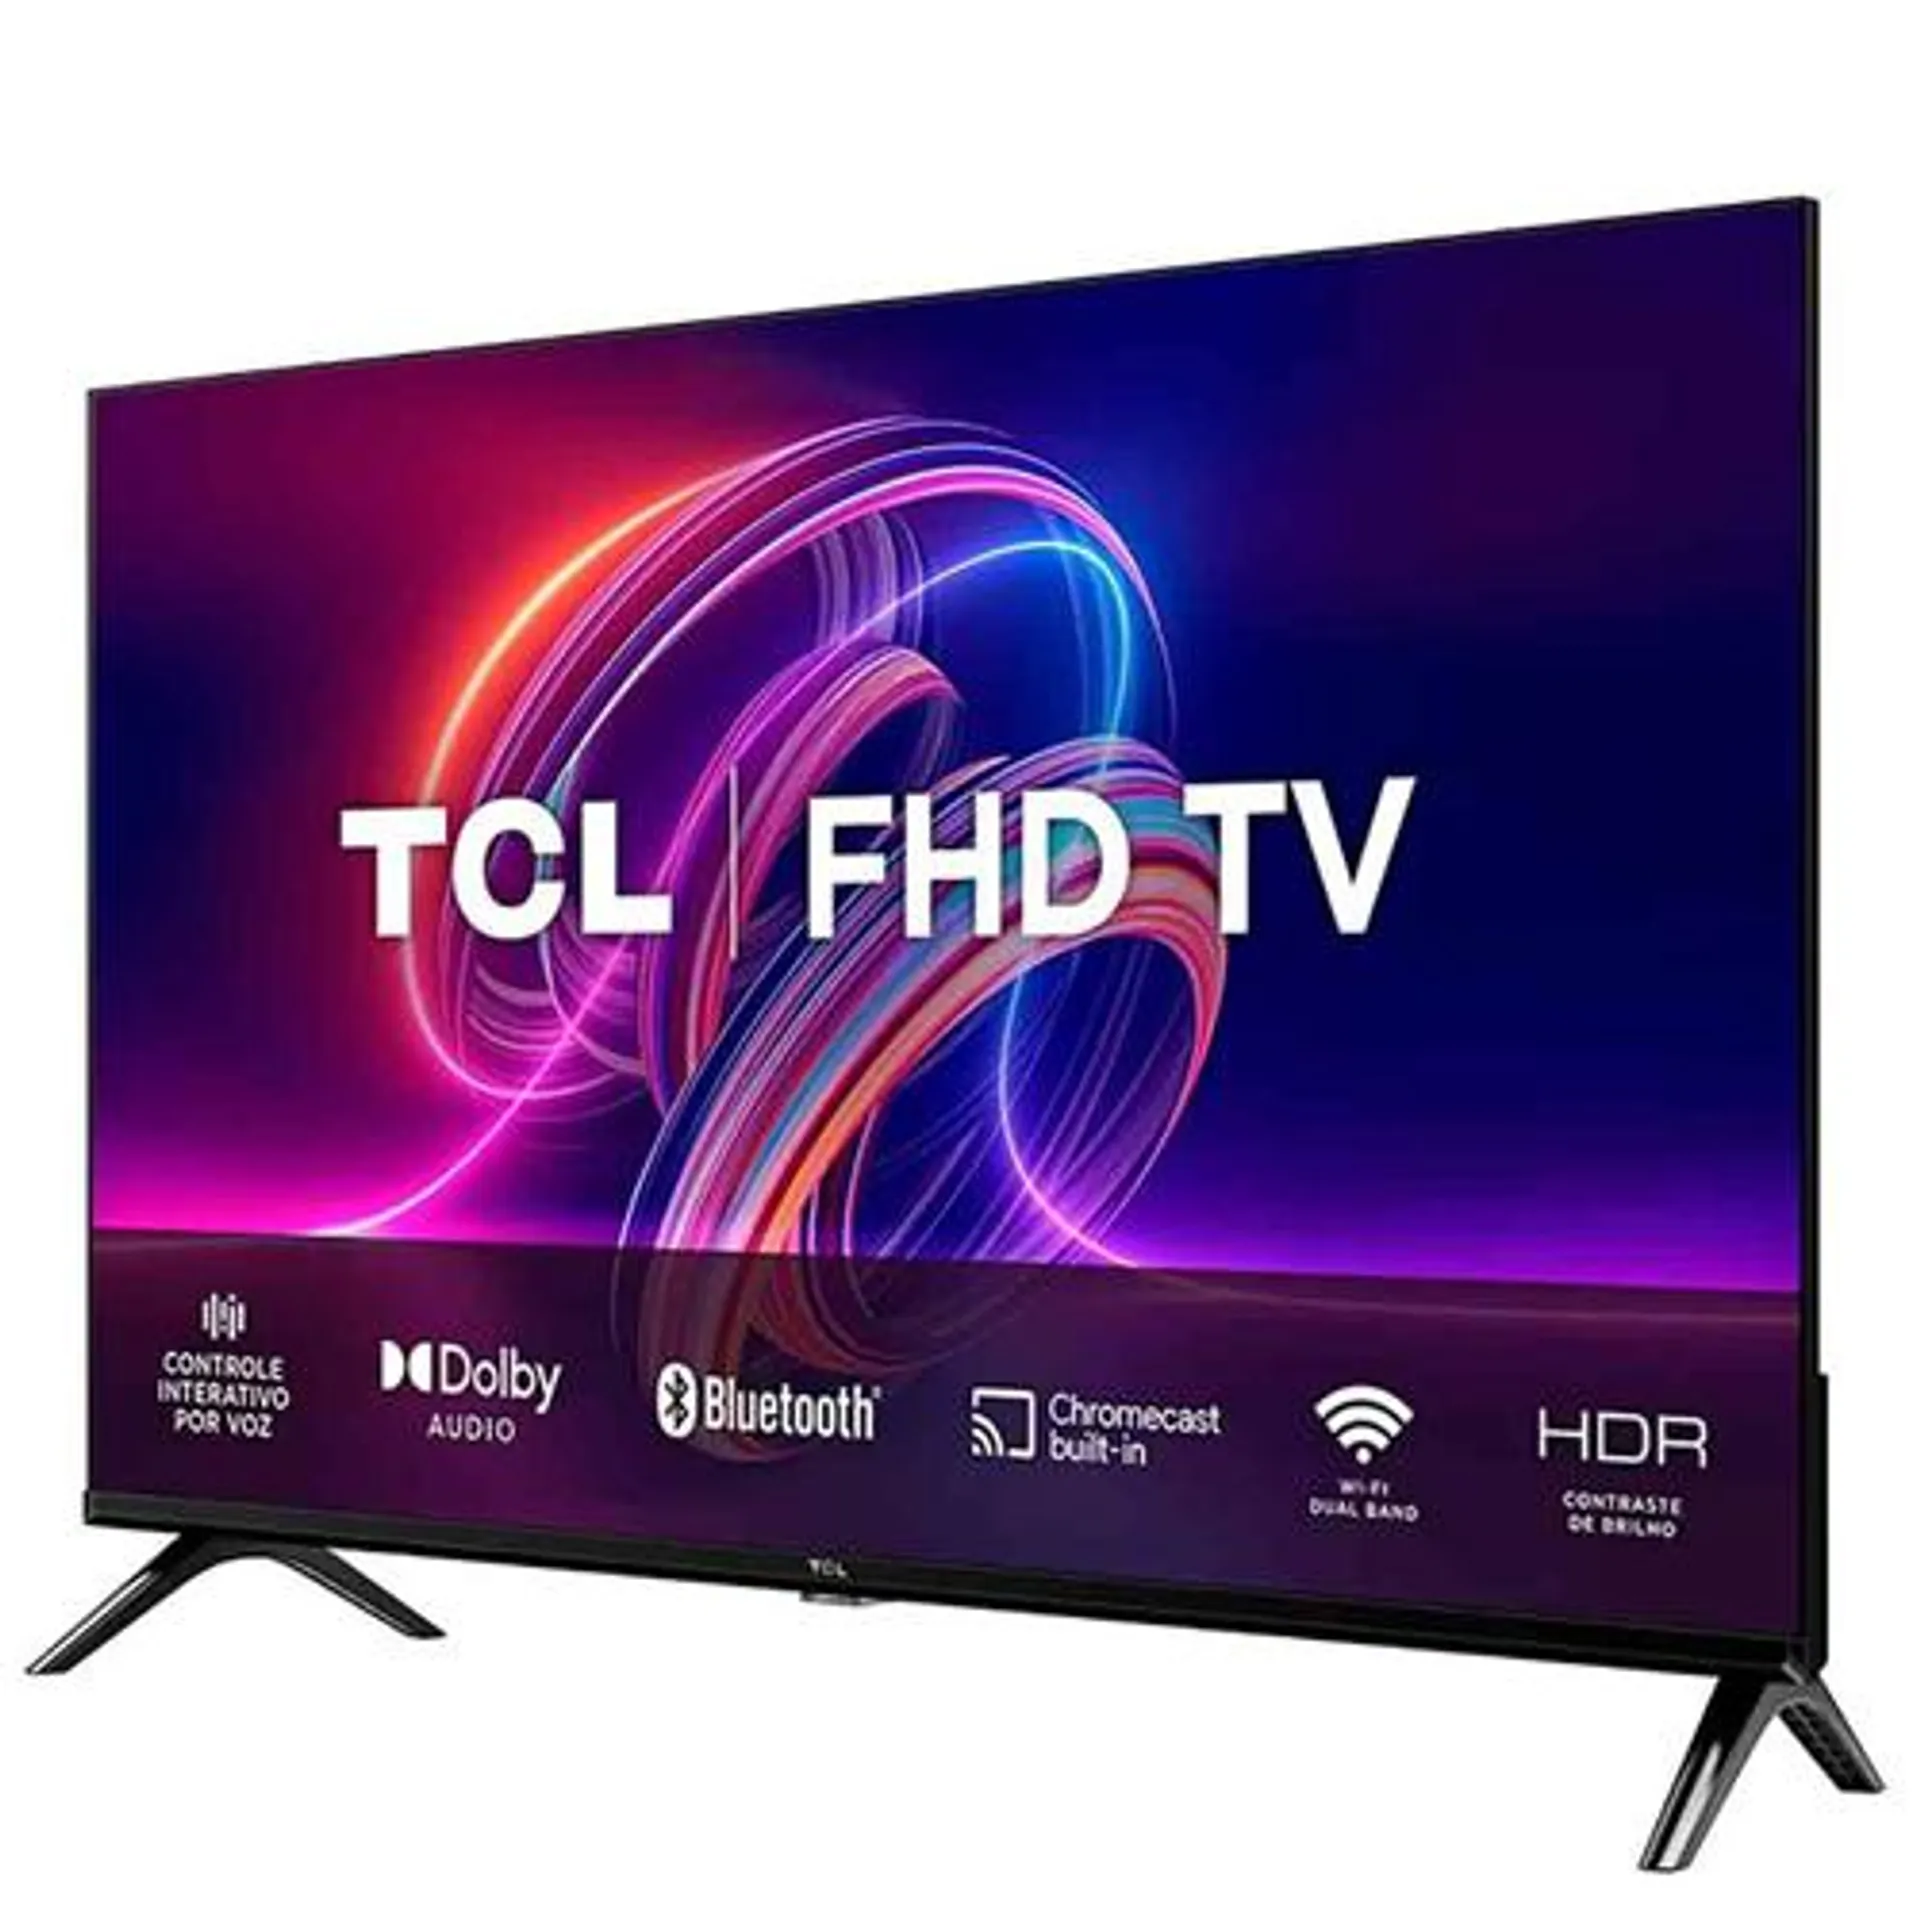 Smart TV 32" Full HD LED TCL 32S5400A Android